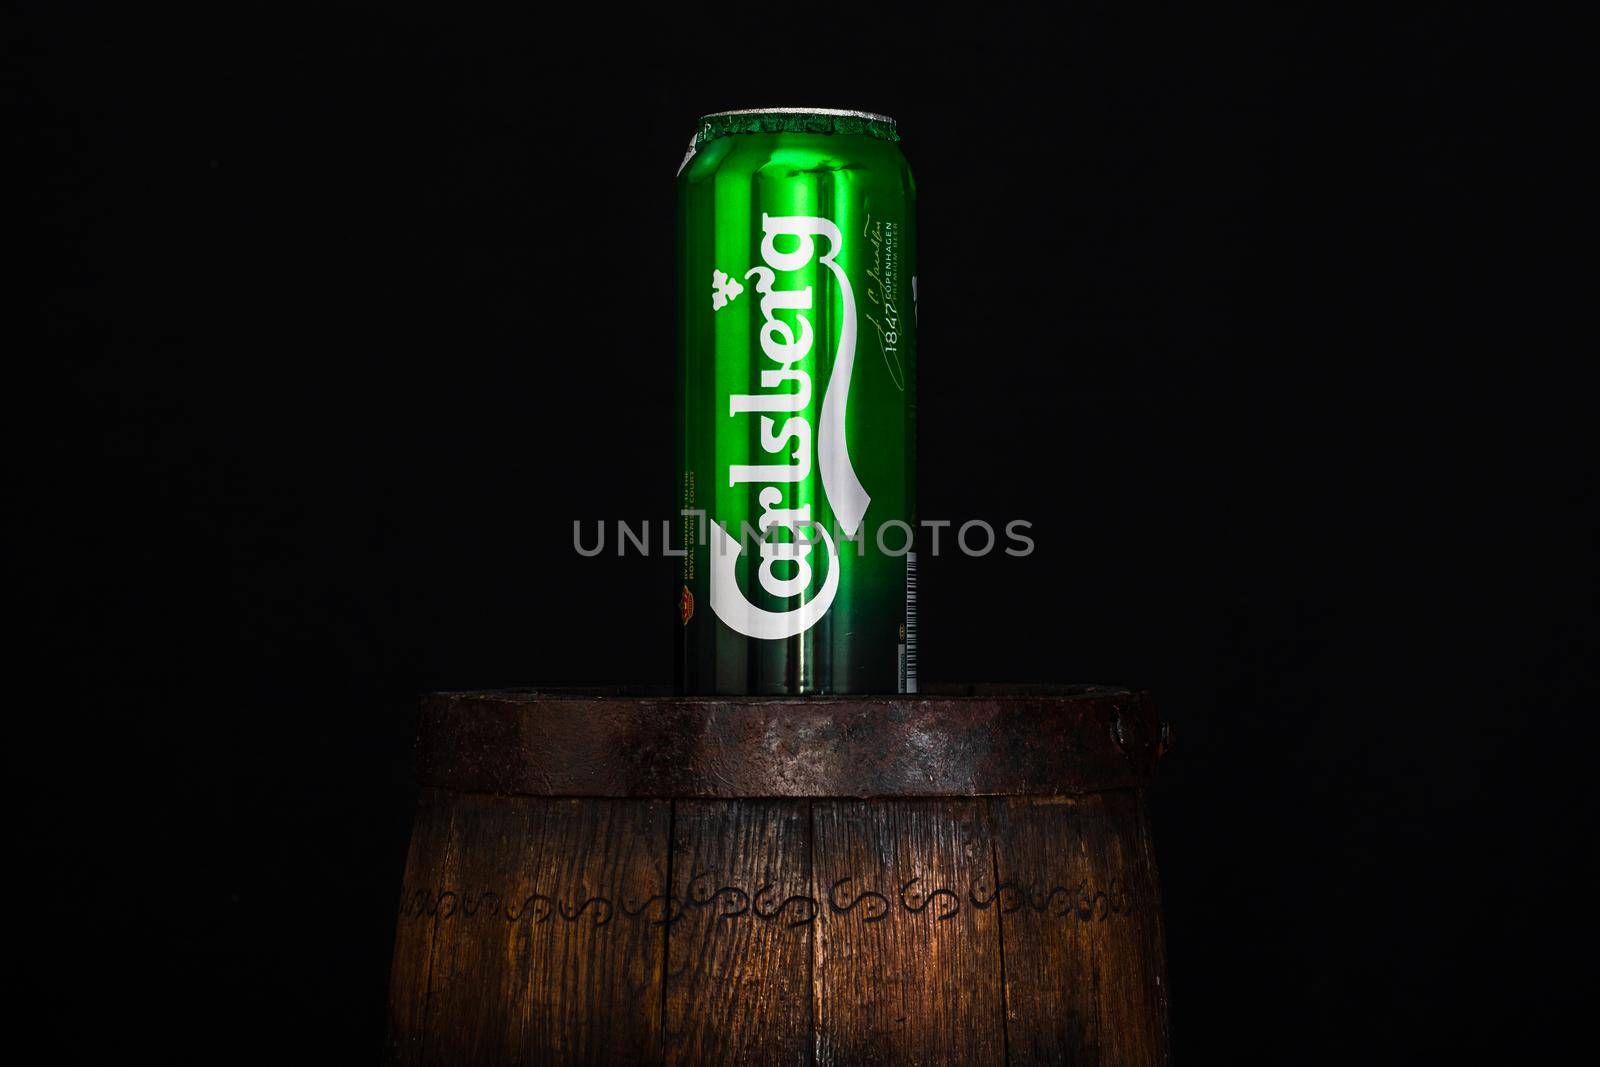 Can of Carsberg beer on beer barrel with dark background. Illustrative editorial photo shot in Bucharest, Romania, 2021